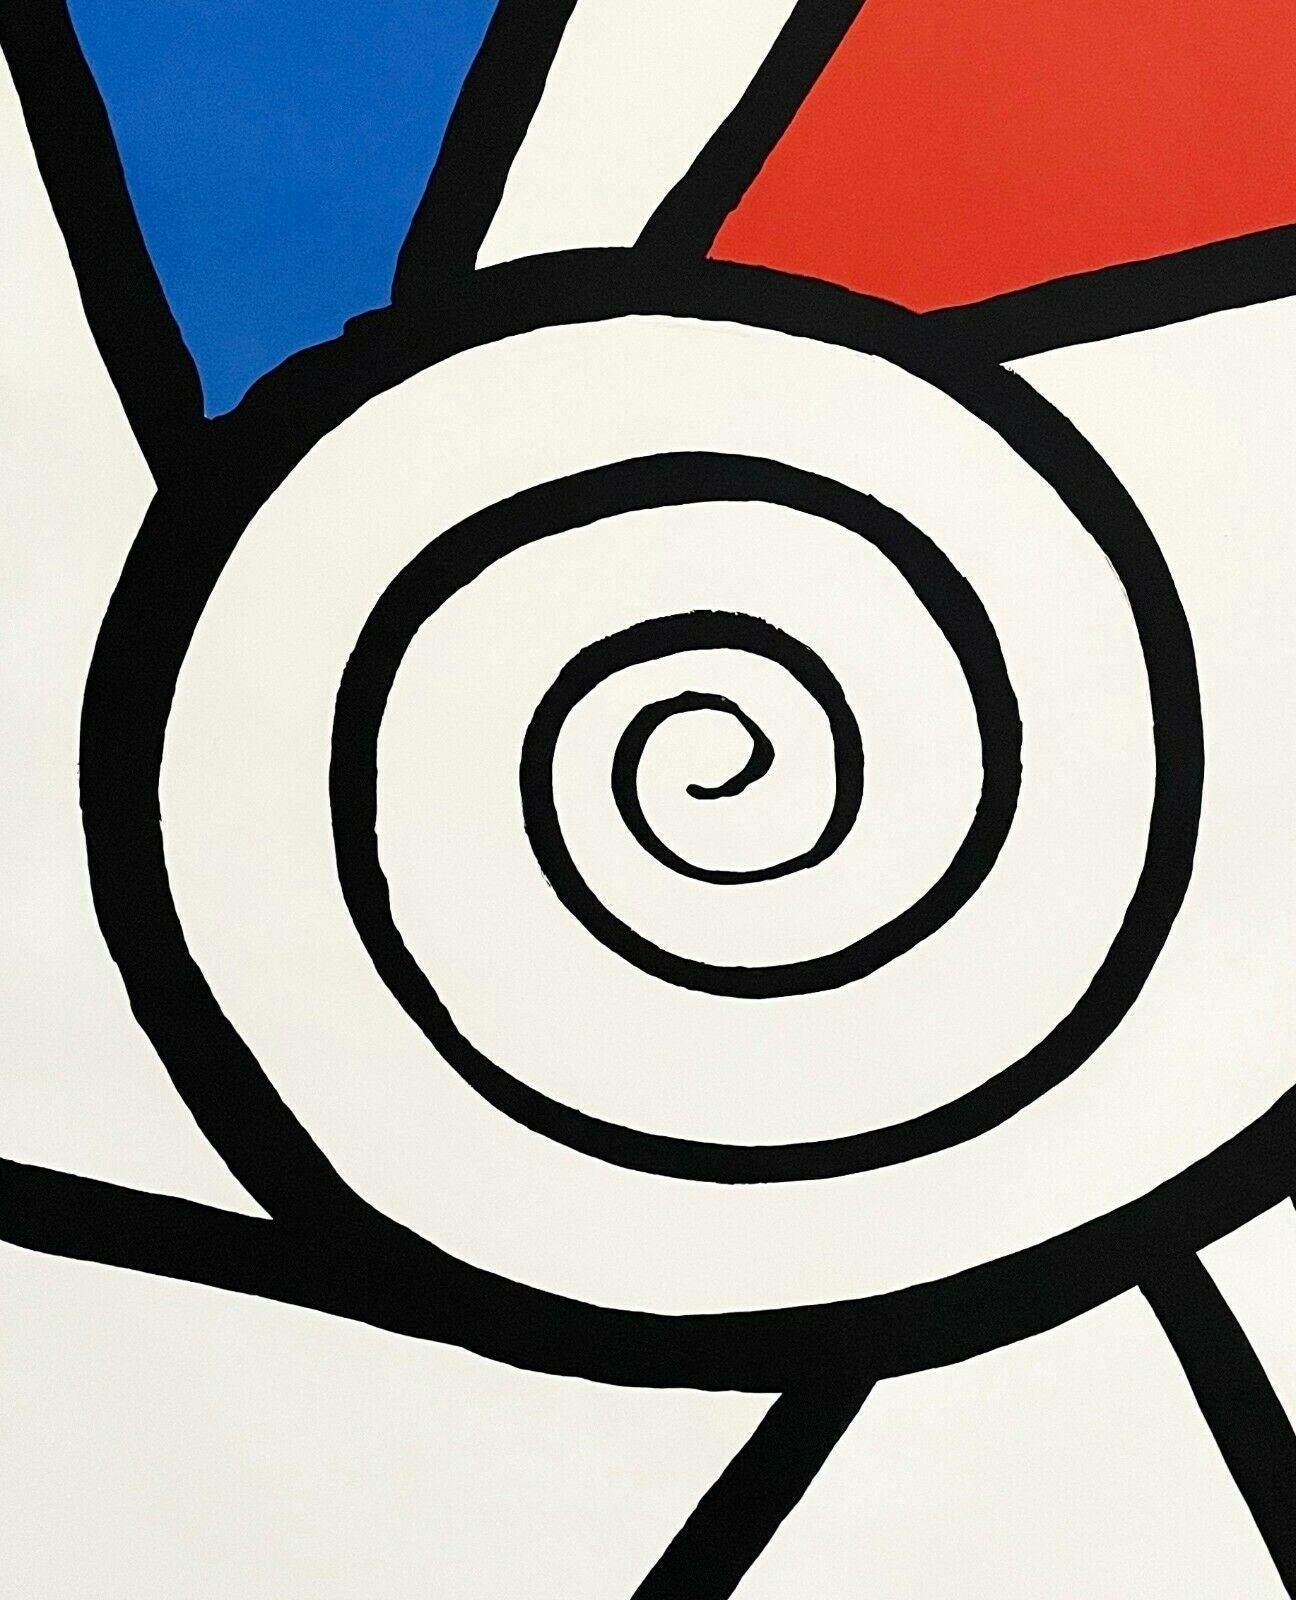 Artist: Alexander Calder (1898-1976)
Title: Spirale rouge et Bleu
Year: 1969
Medium: Lithograph in colors on wove paper
Edition: 75, plus proofs
Size: 42 x 28.75 inches
Condition: Excellent
Inscription: Signed and numbered 48/75 in pencil by the